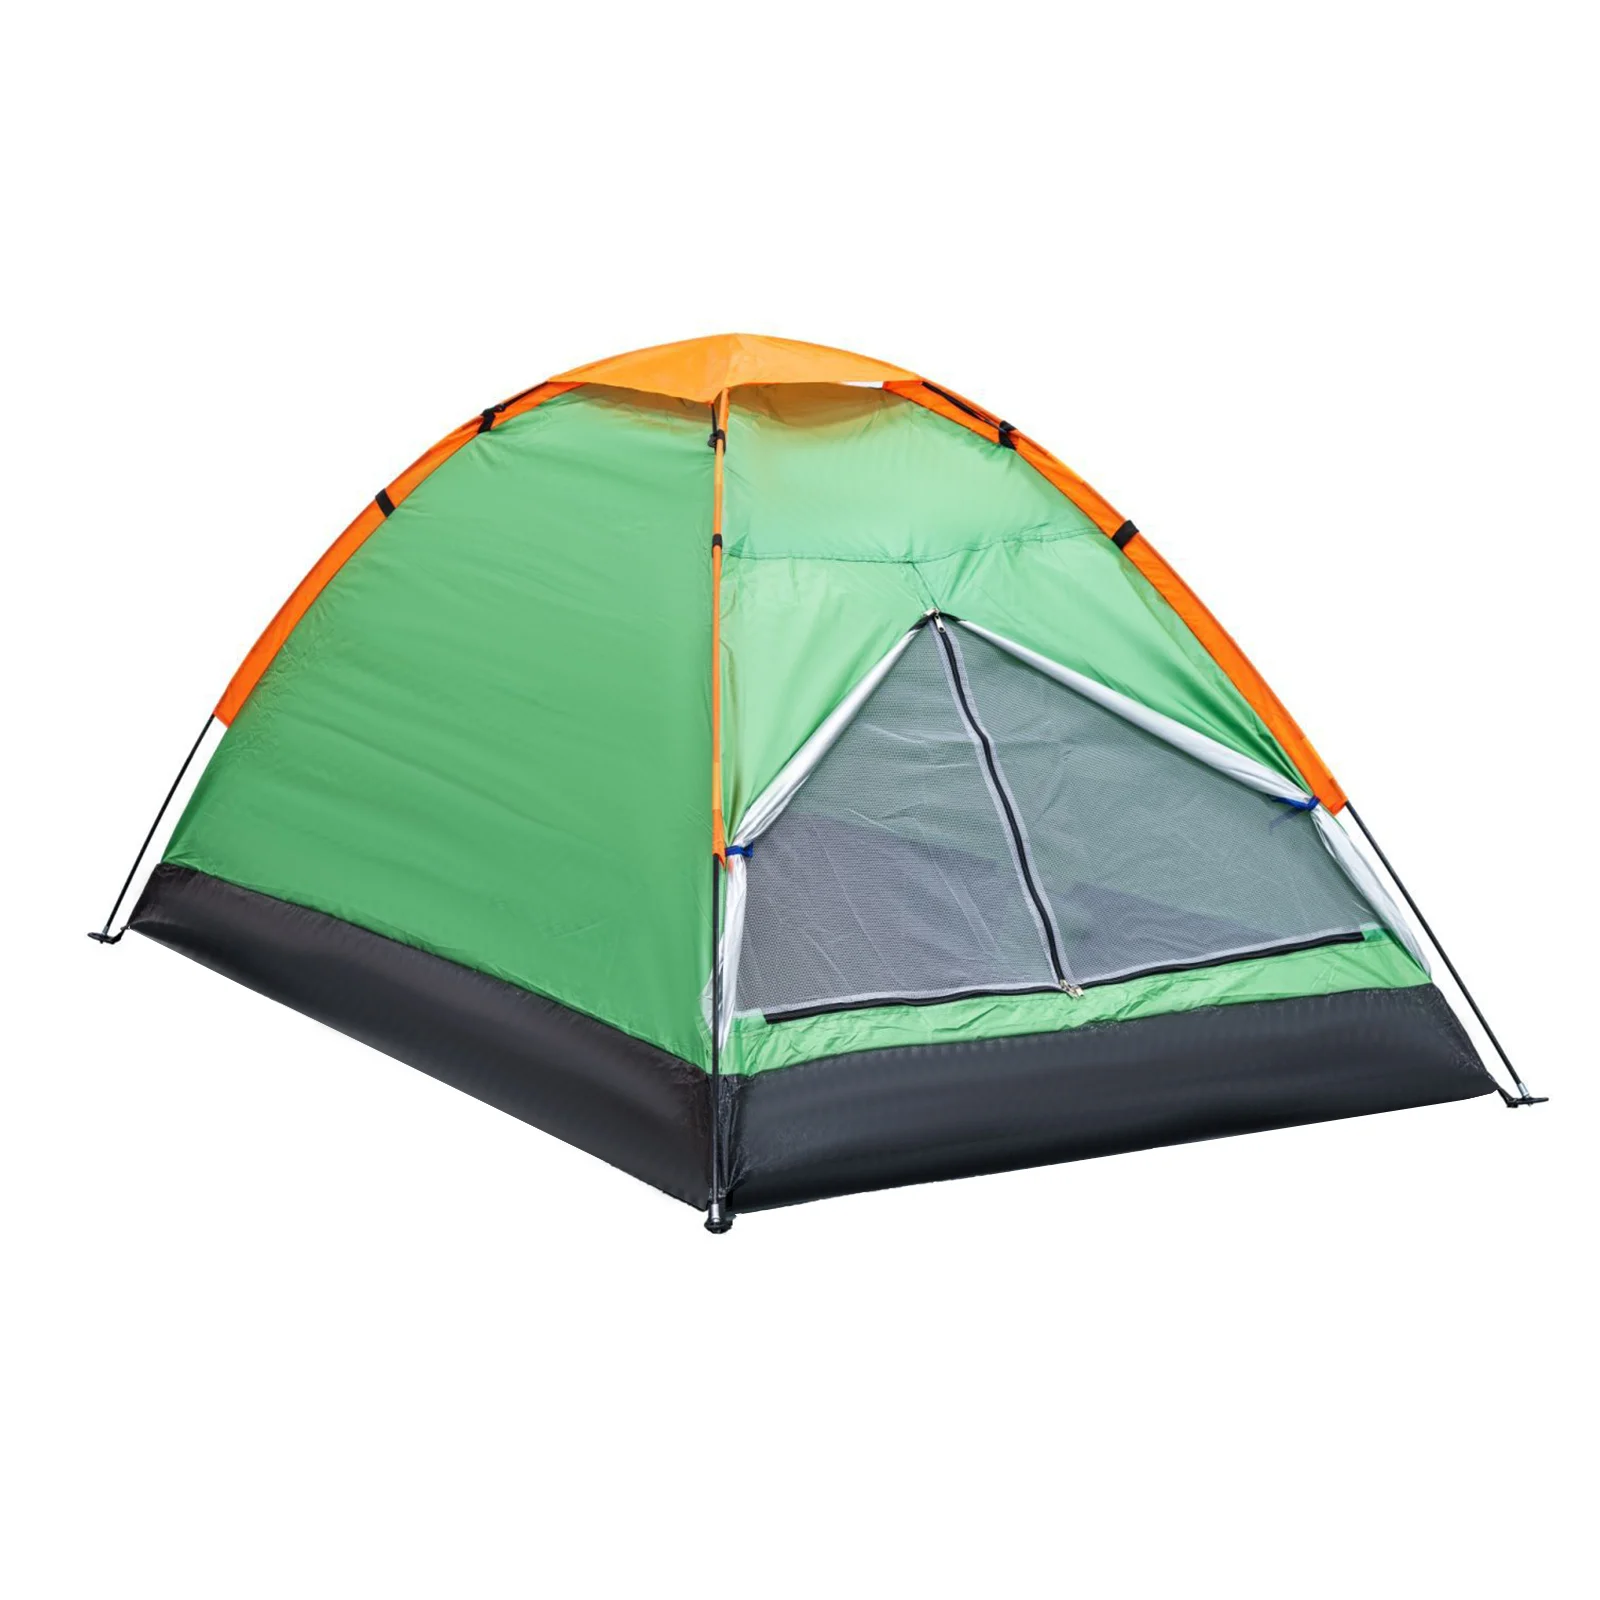 

Canopies Tent With Rain Fly Wakeman 190T Polyester 2-Person Backpacking Camping Compact Beach Hiking Indoor/outdoor